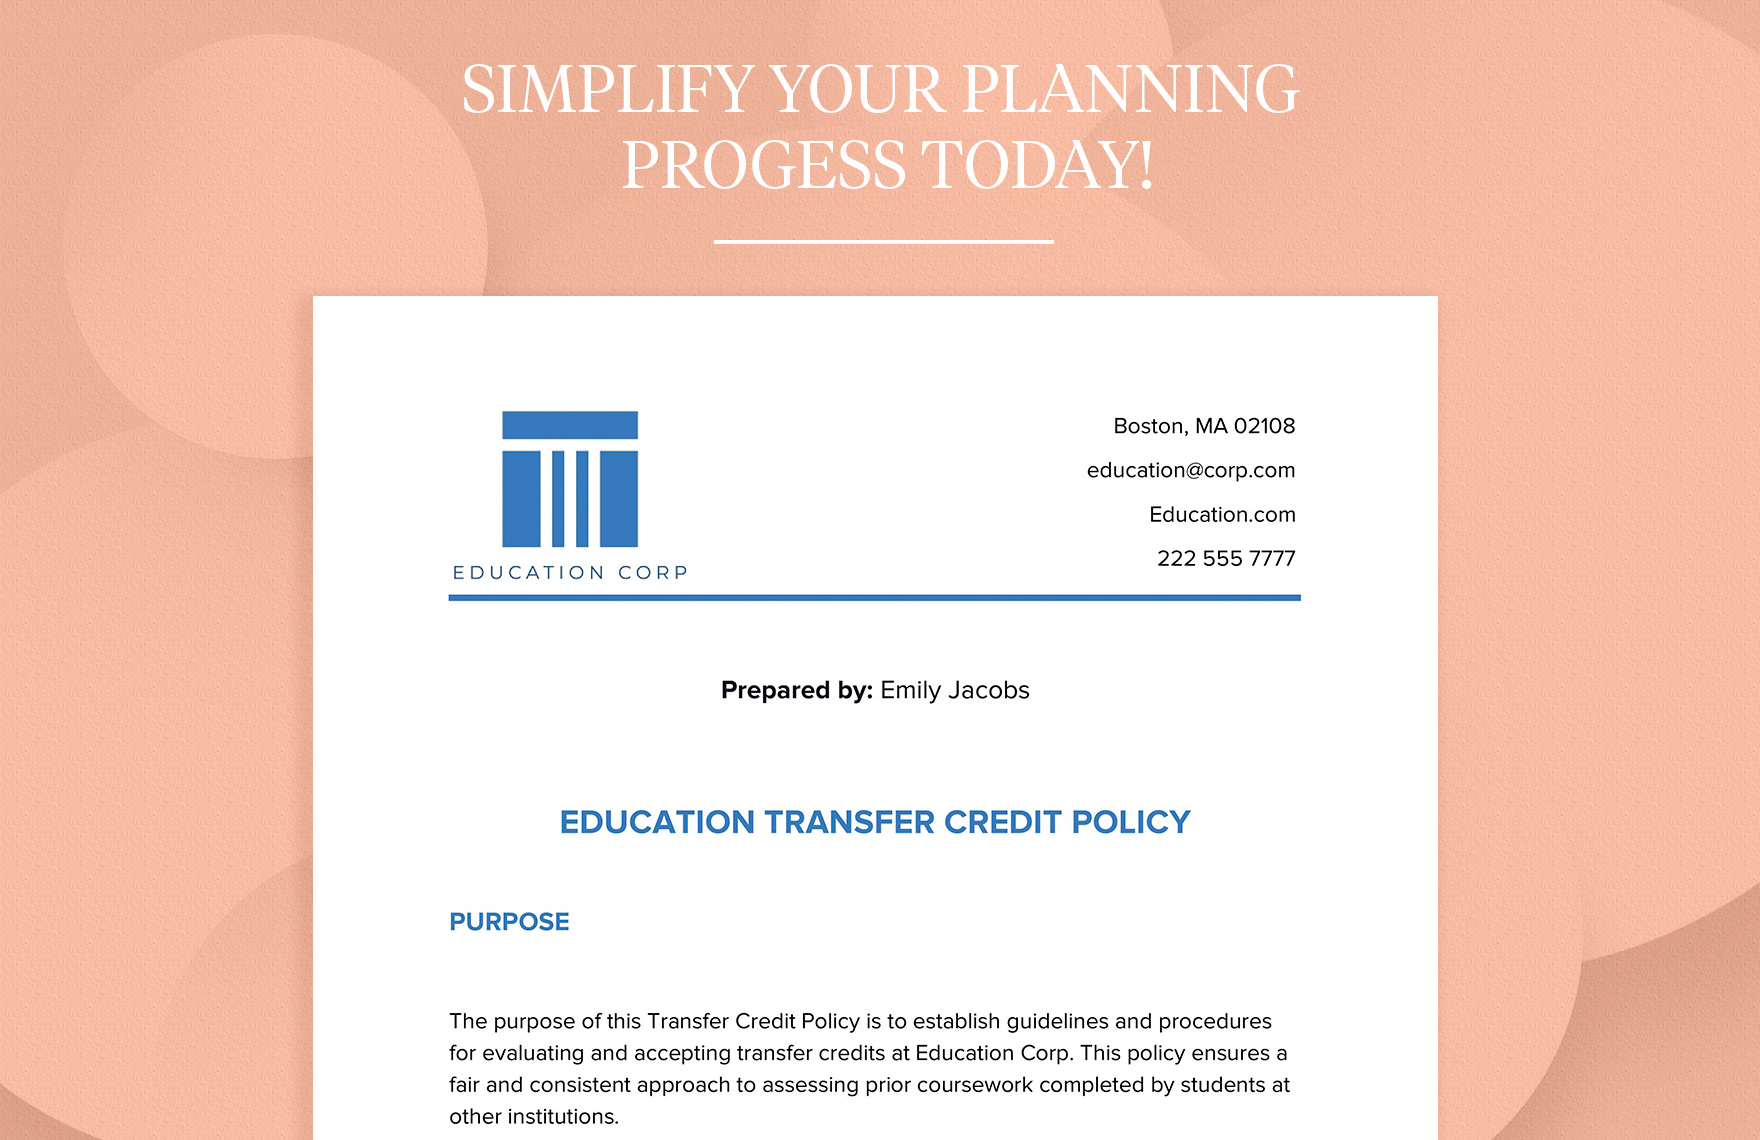 Education Transfer Credit Policy